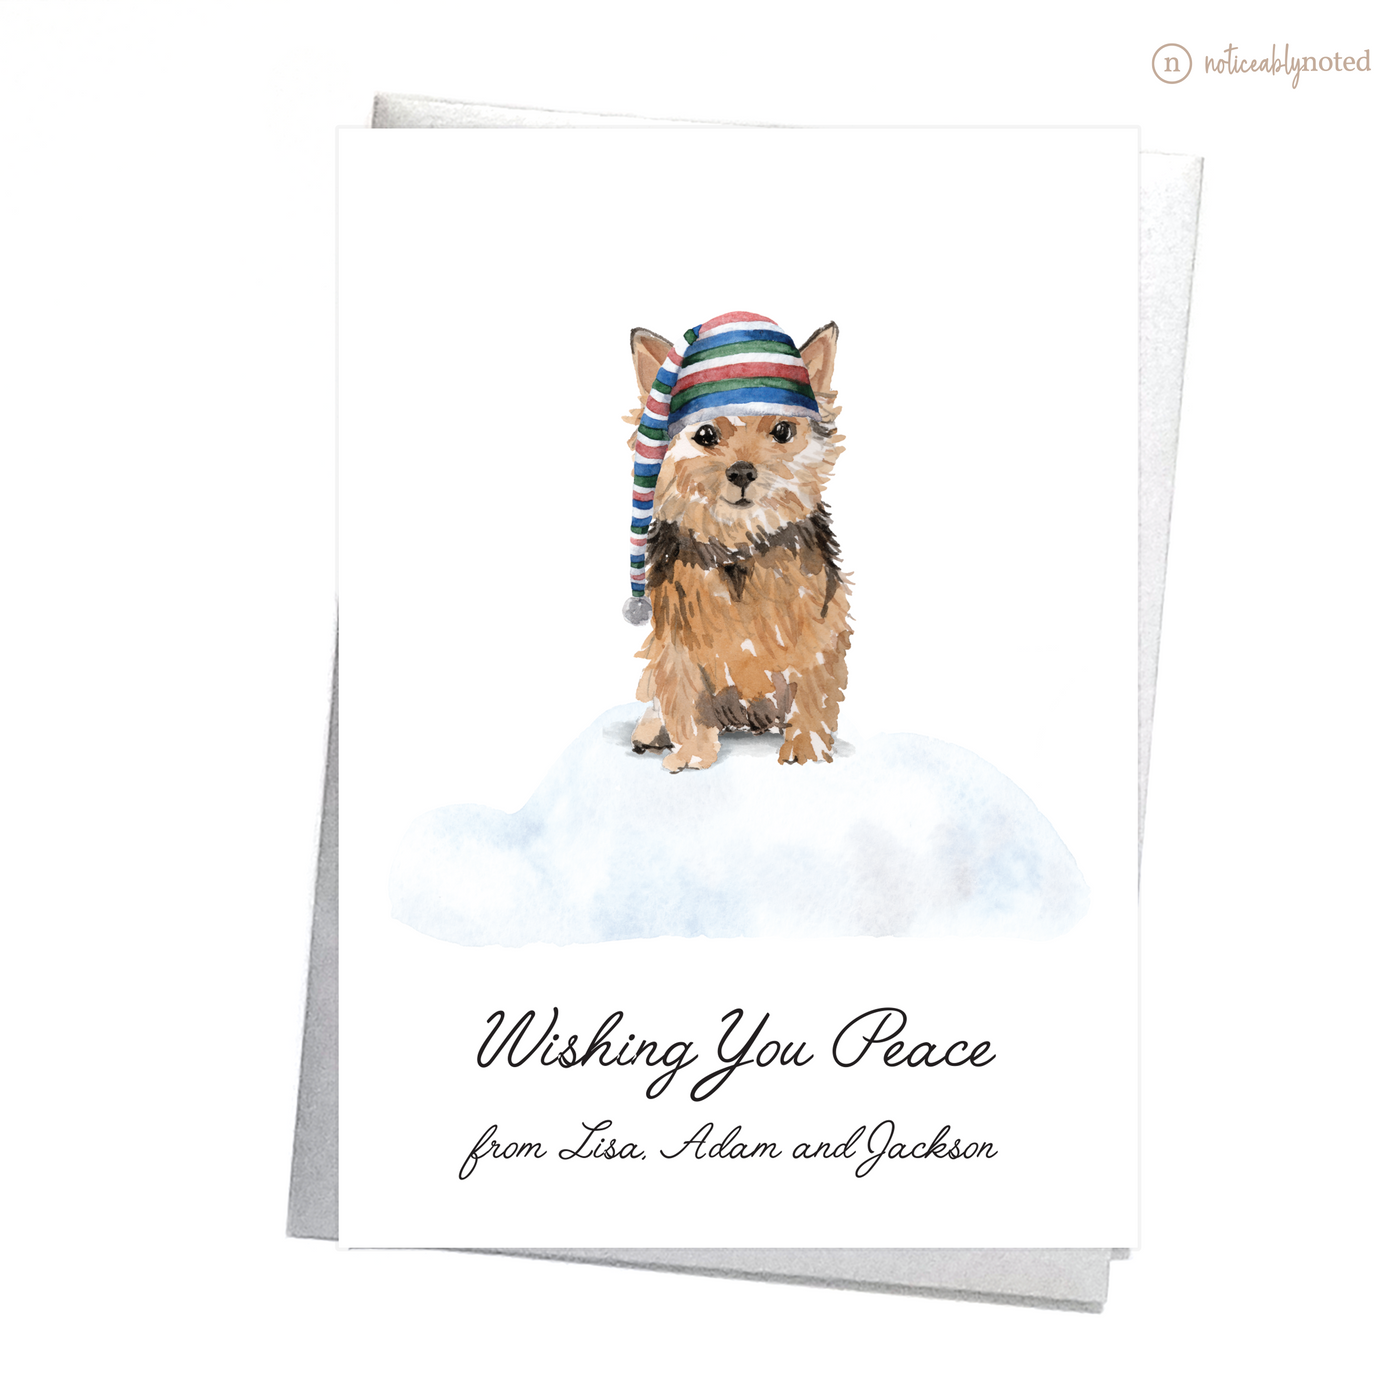 Norfolk Terrier Dog Holiday Greeting Cards | Noticeably Noted